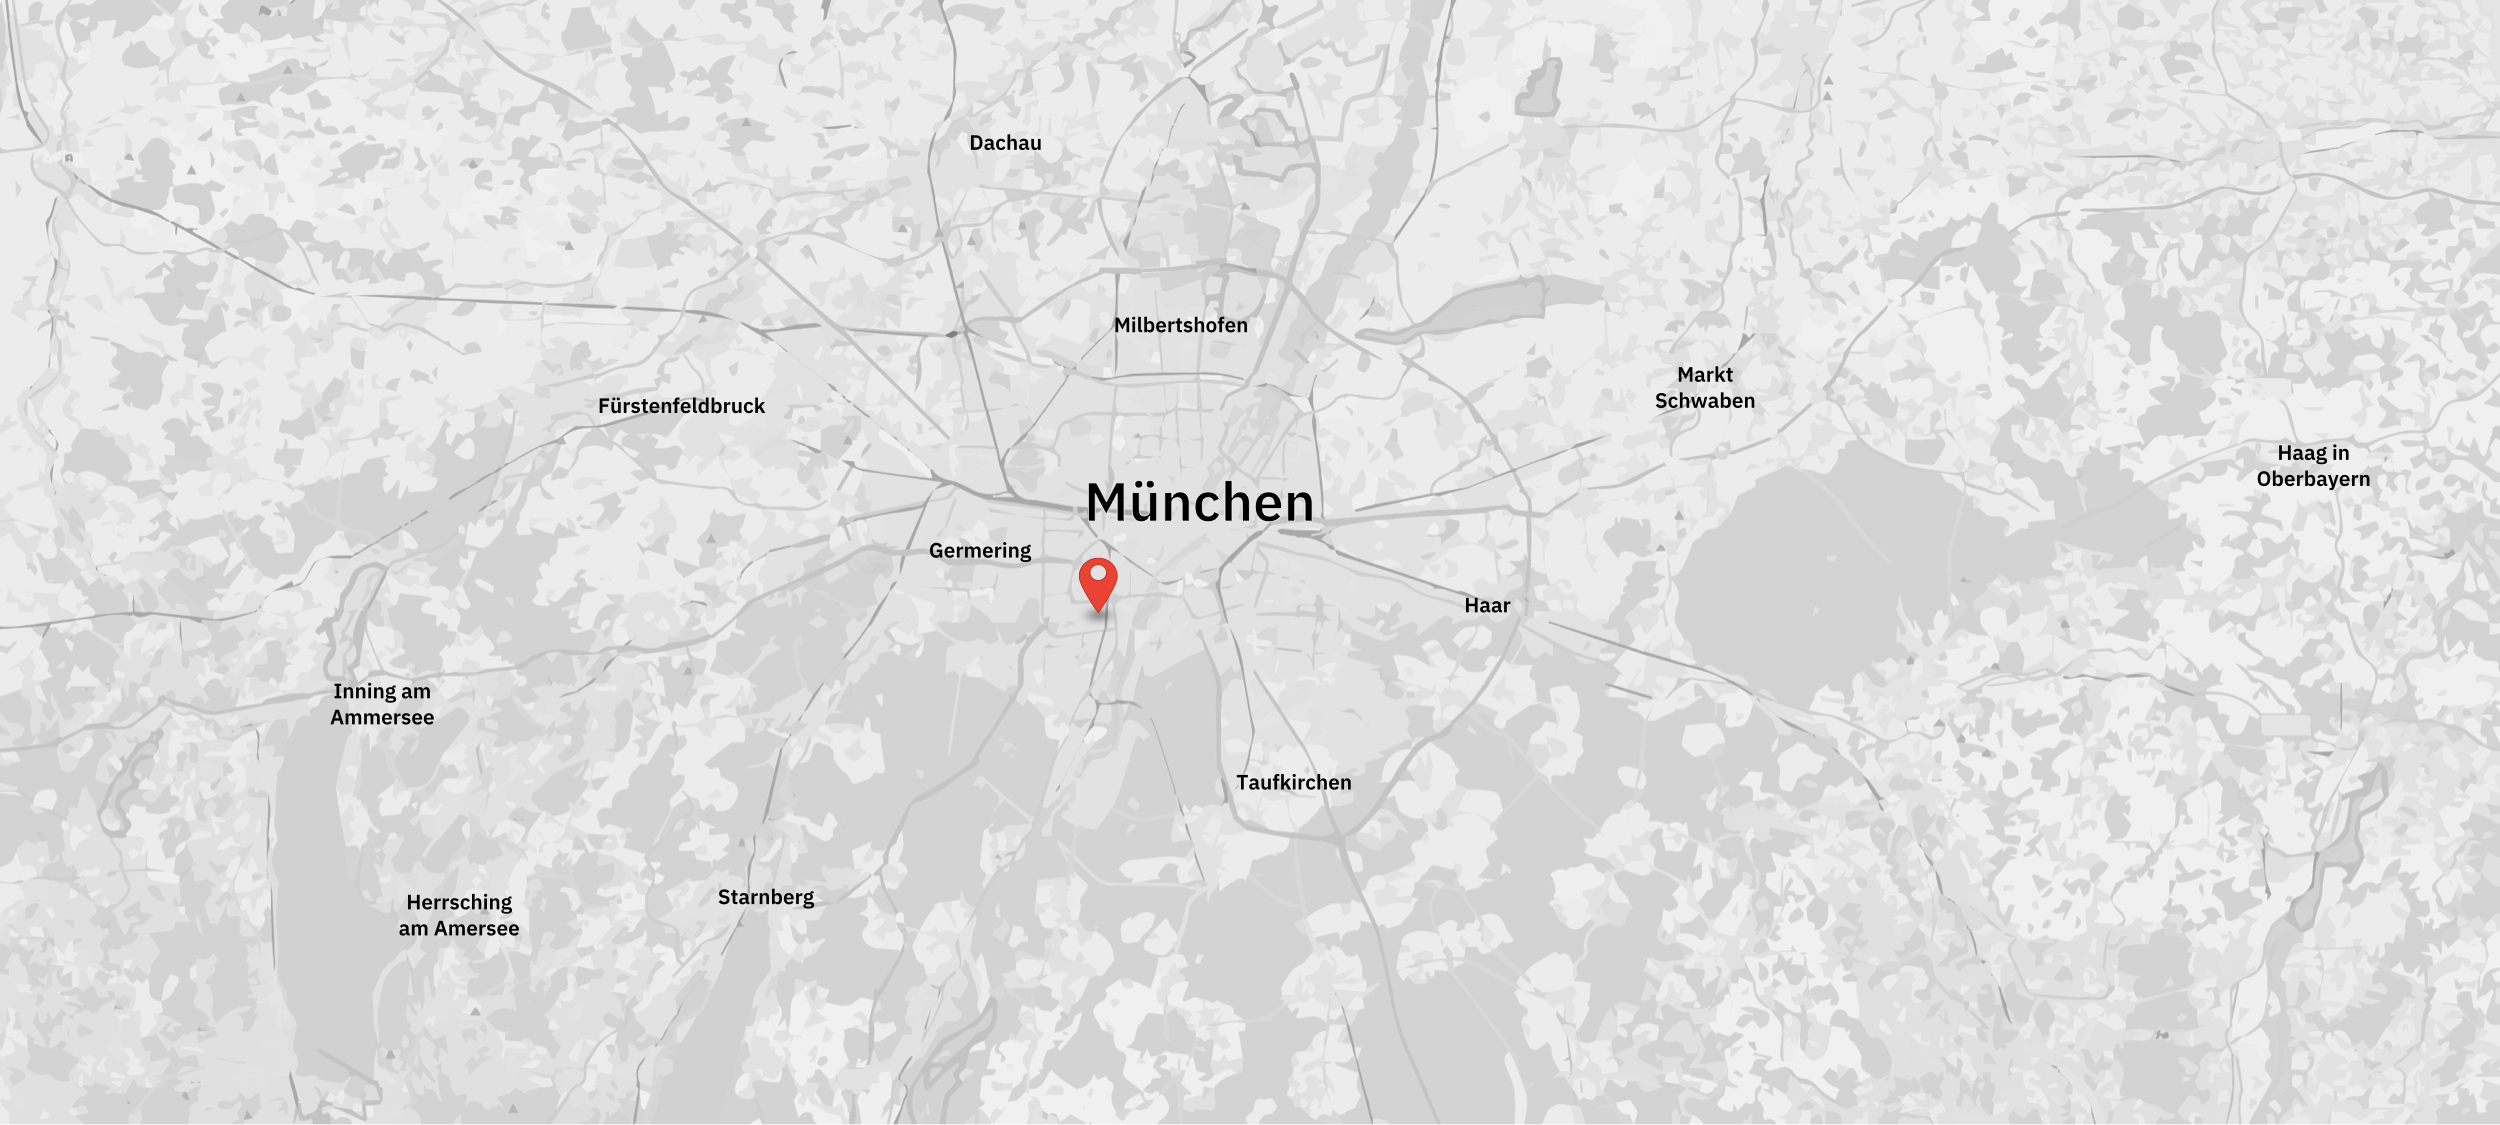 Abstract map of Munich and surrounding area.